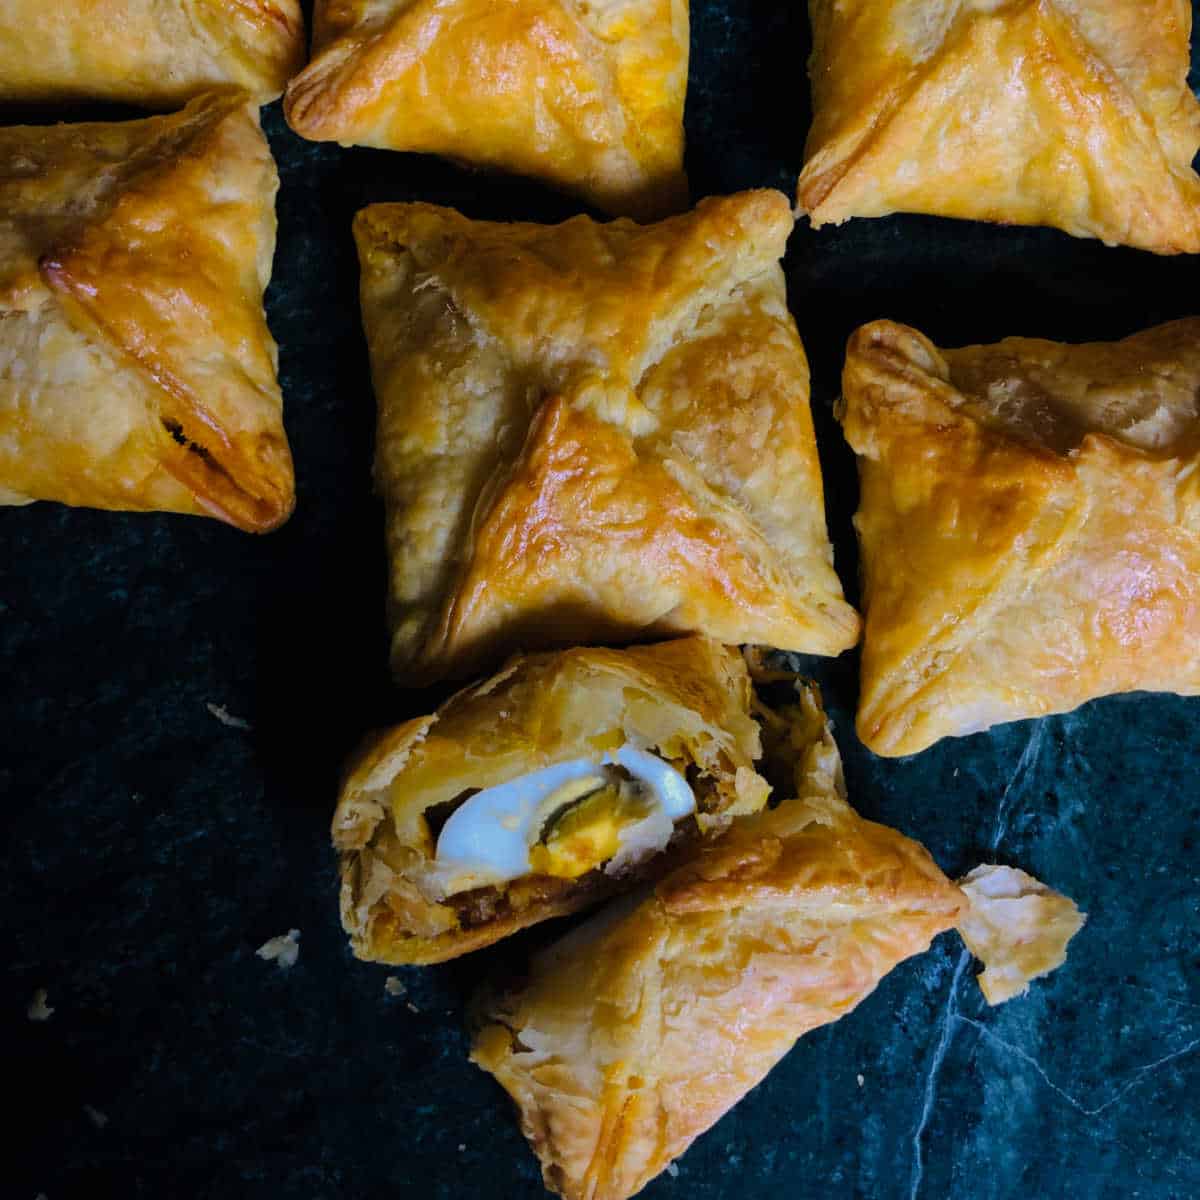 crispy egg puffs with pastry sheets.